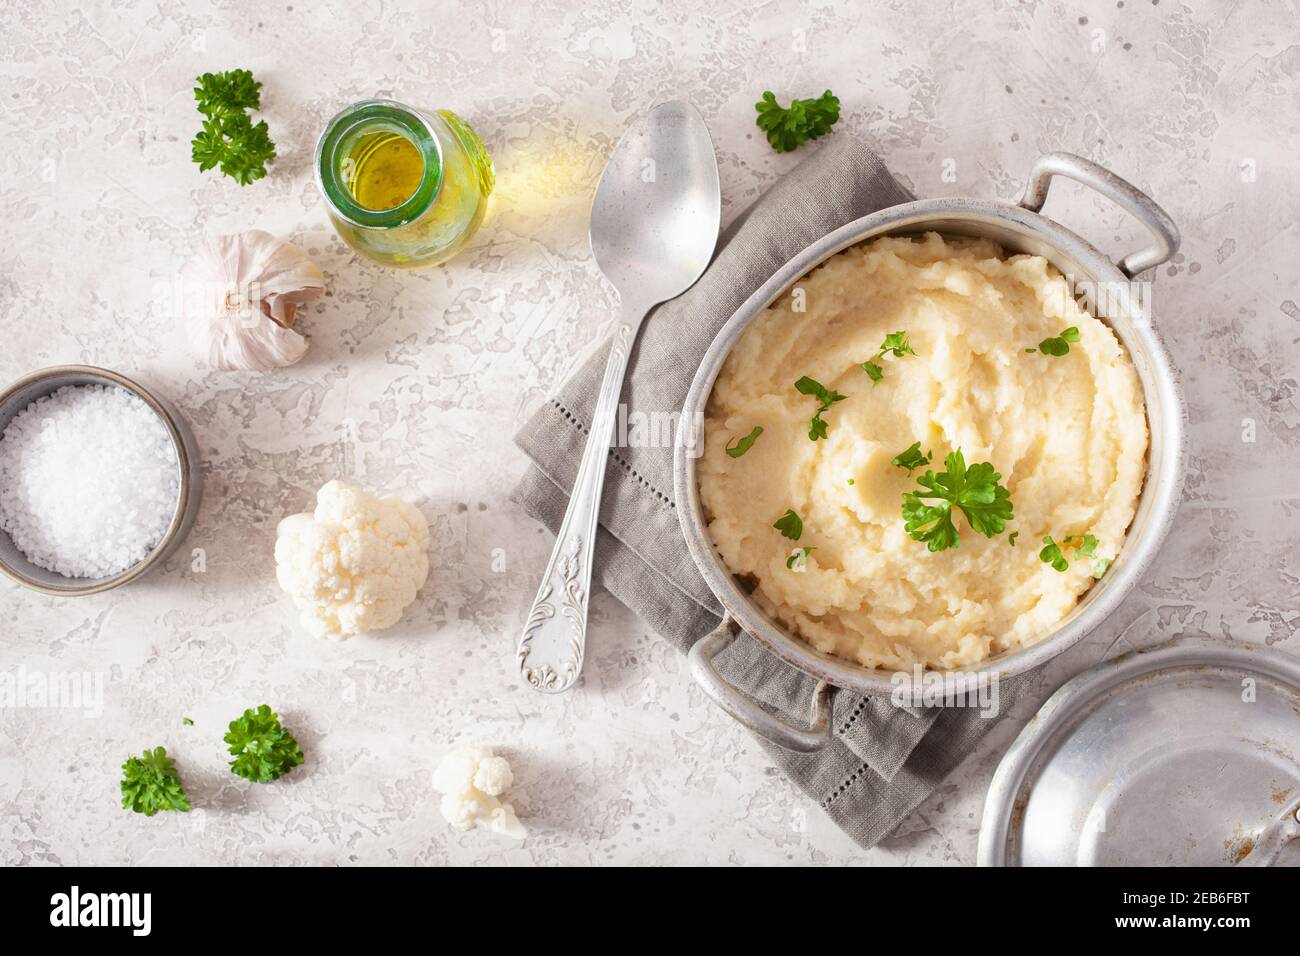 mashed cauliflower with butter. ketogenic paleo diet side dish Stock Photo